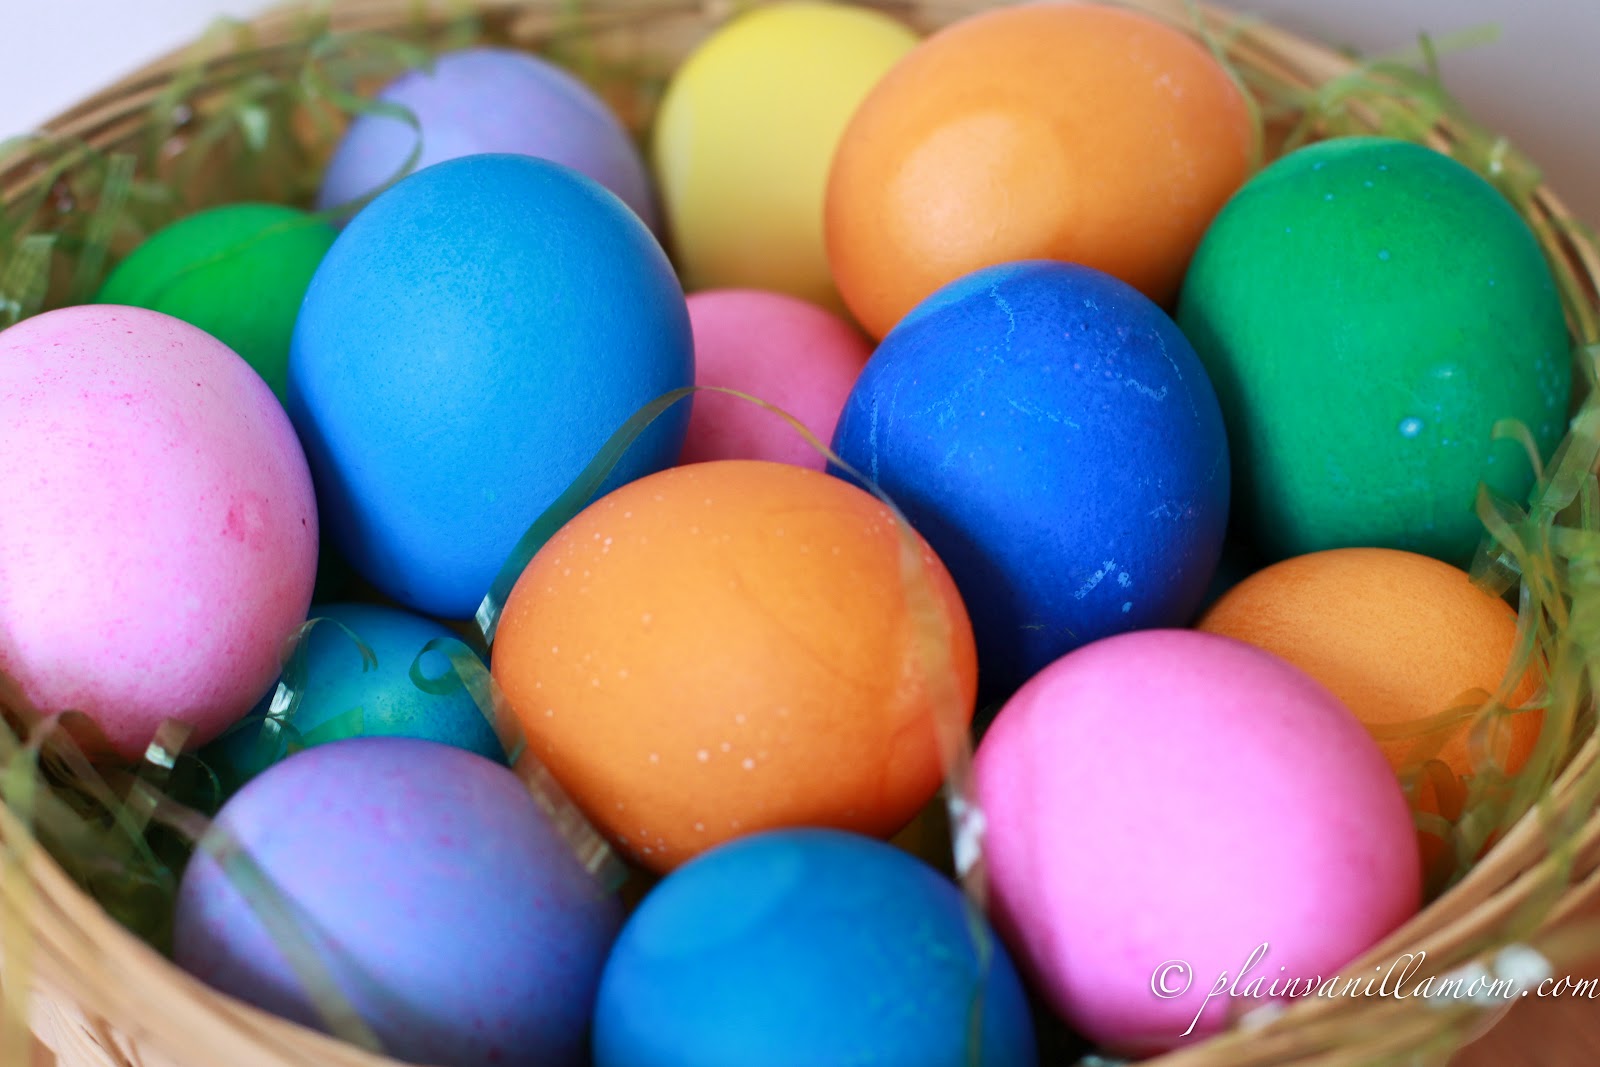 Coloring Easter Eggs With Food Coloring Coloring Wallpapers Download Free Images Wallpaper [coloring654.blogspot.com]